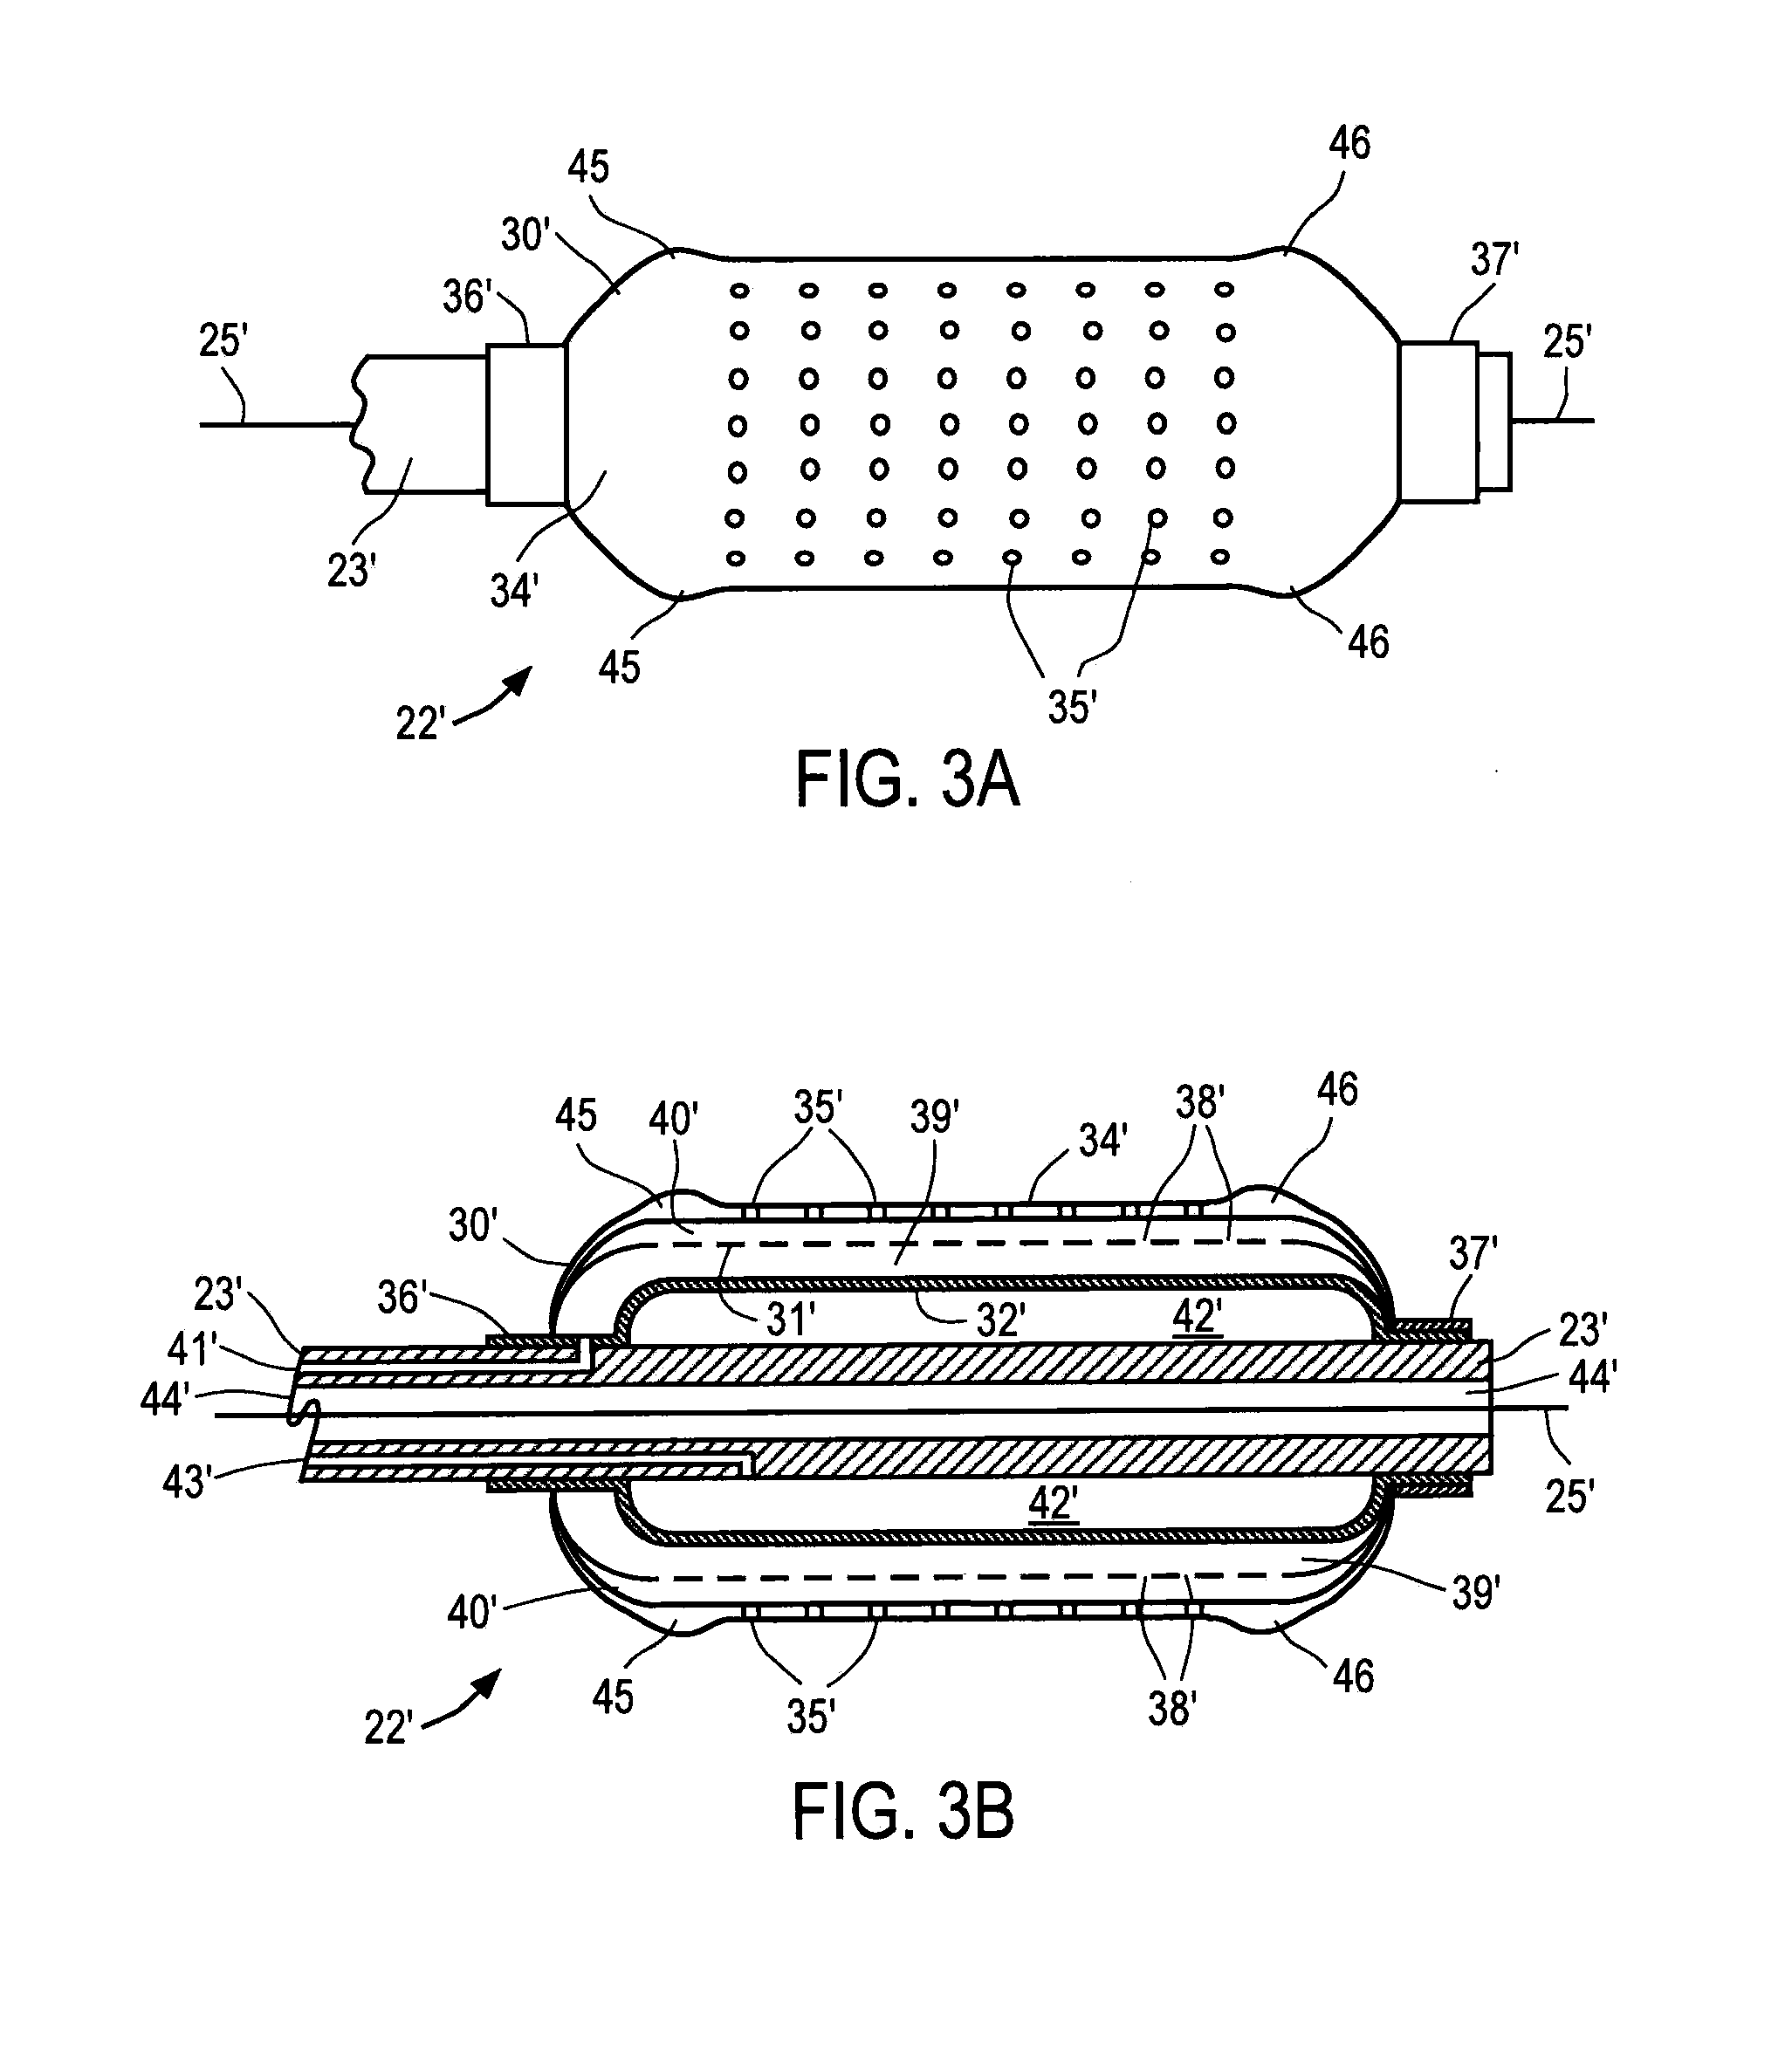 Apparatus and method for delivering intraluminal therapy